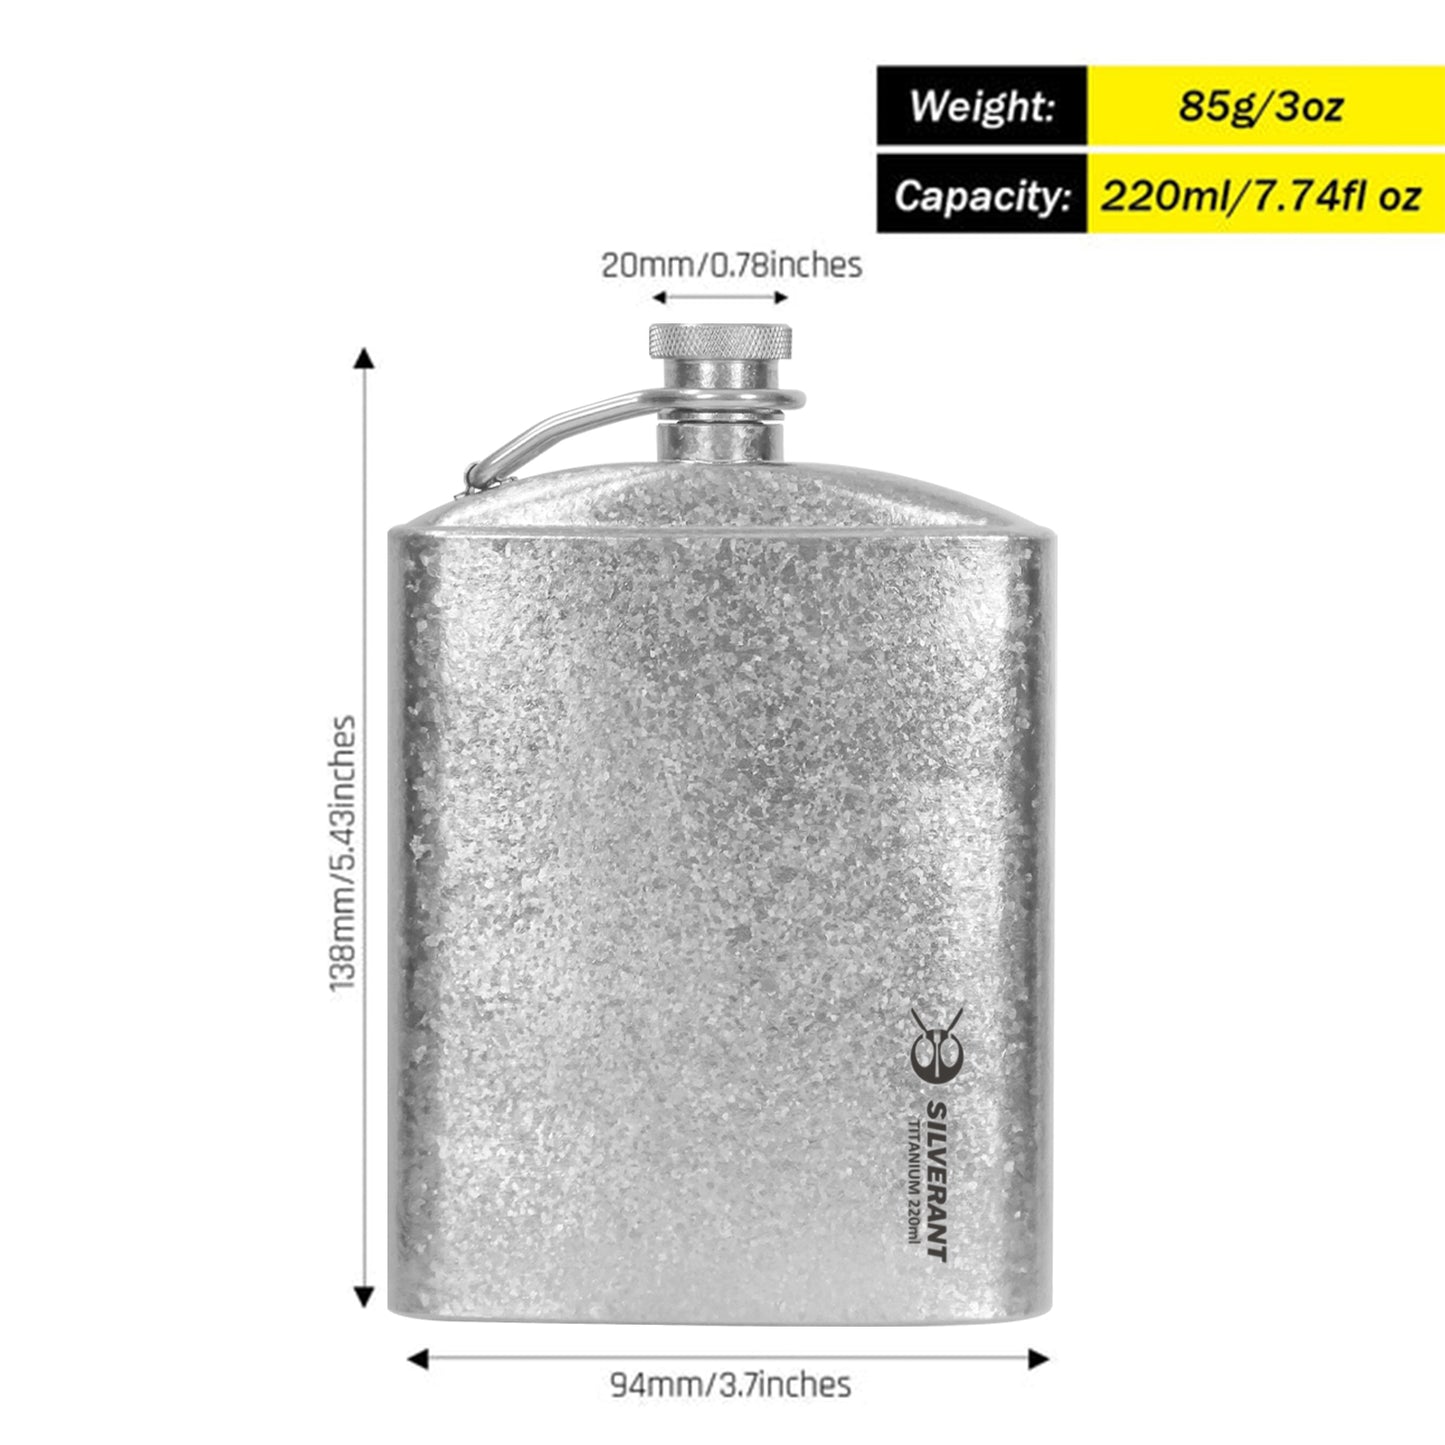 
                  
                    Titanium Hip Flask With Funnel - 220ml/7.74 fl oz - crystallized finish - weight and dimension
                  
                